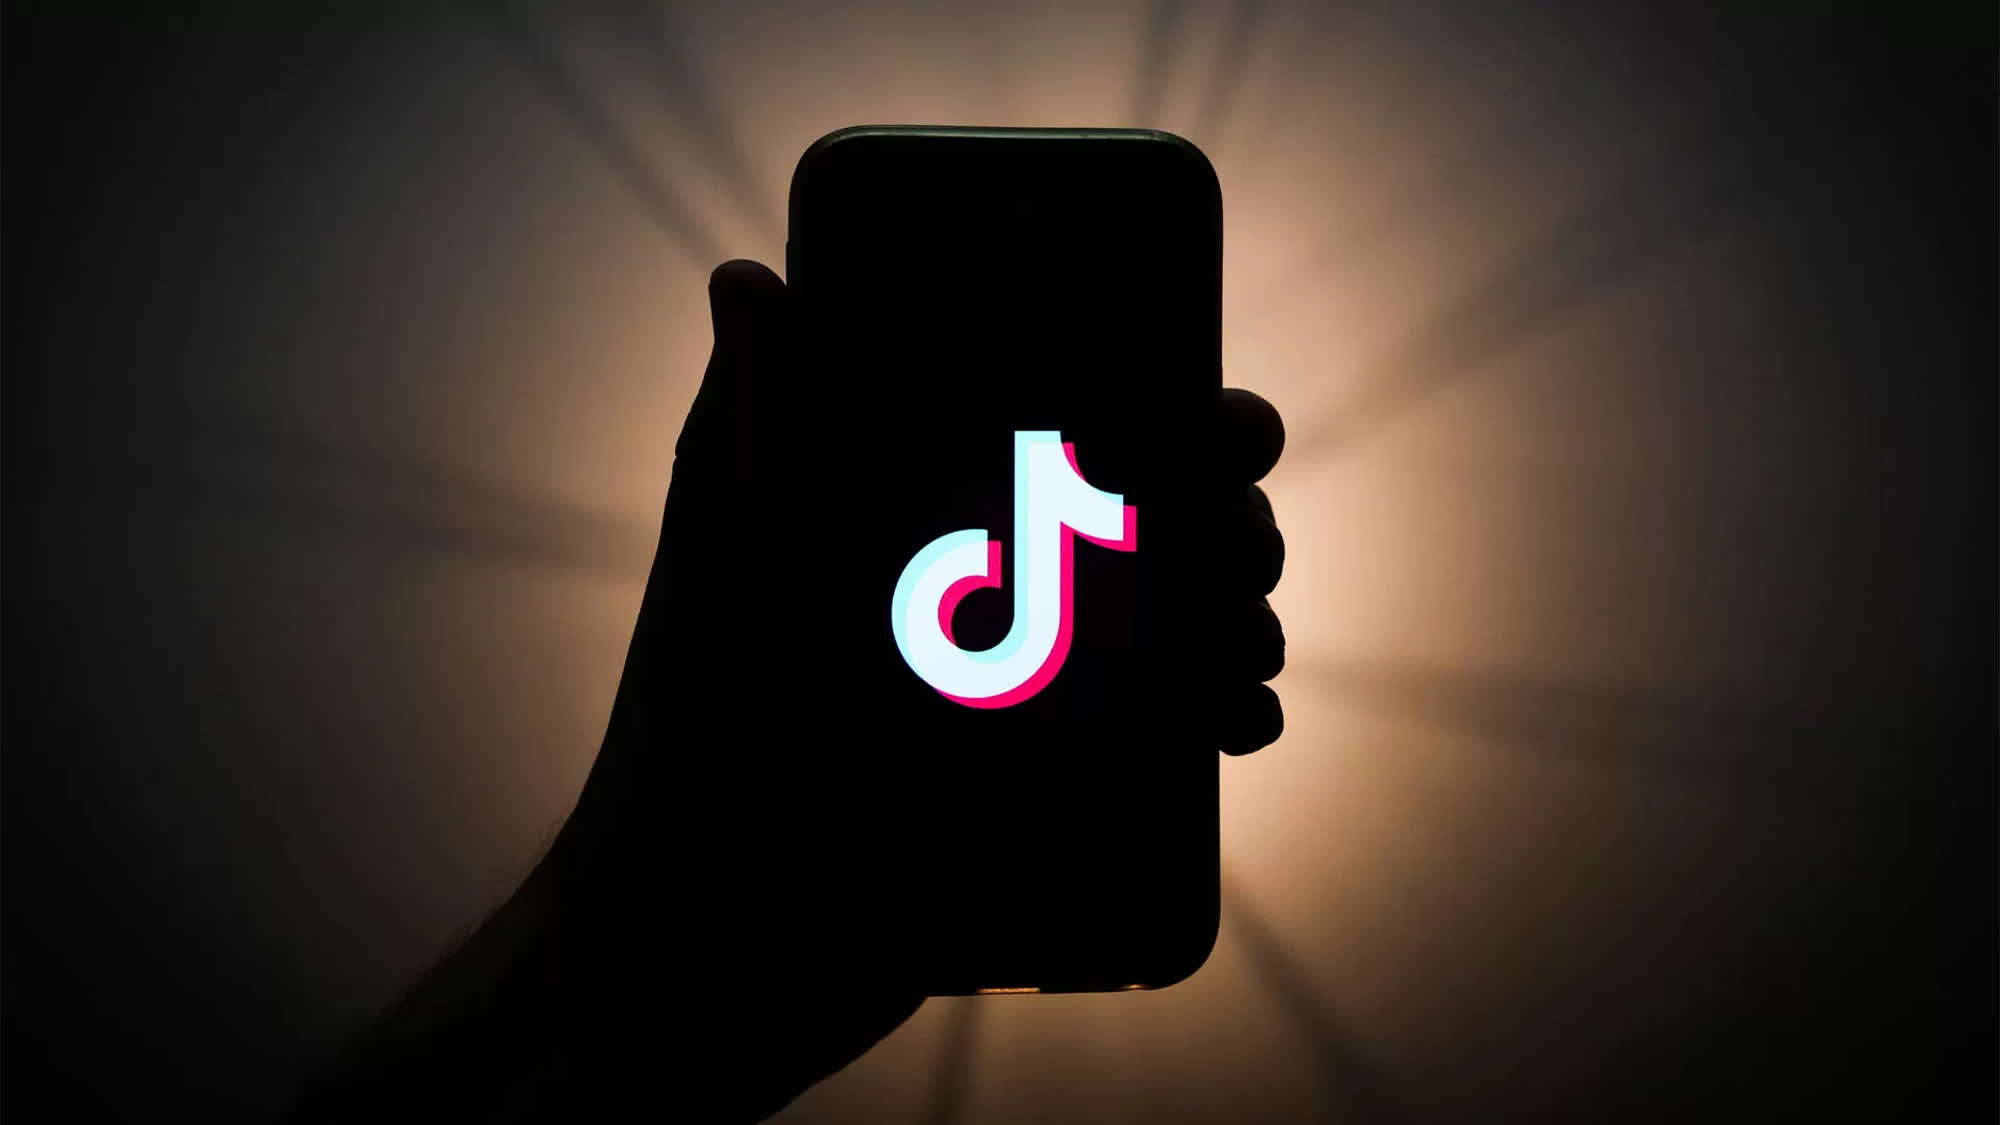 Montana has banned TikTok for everyone in the state